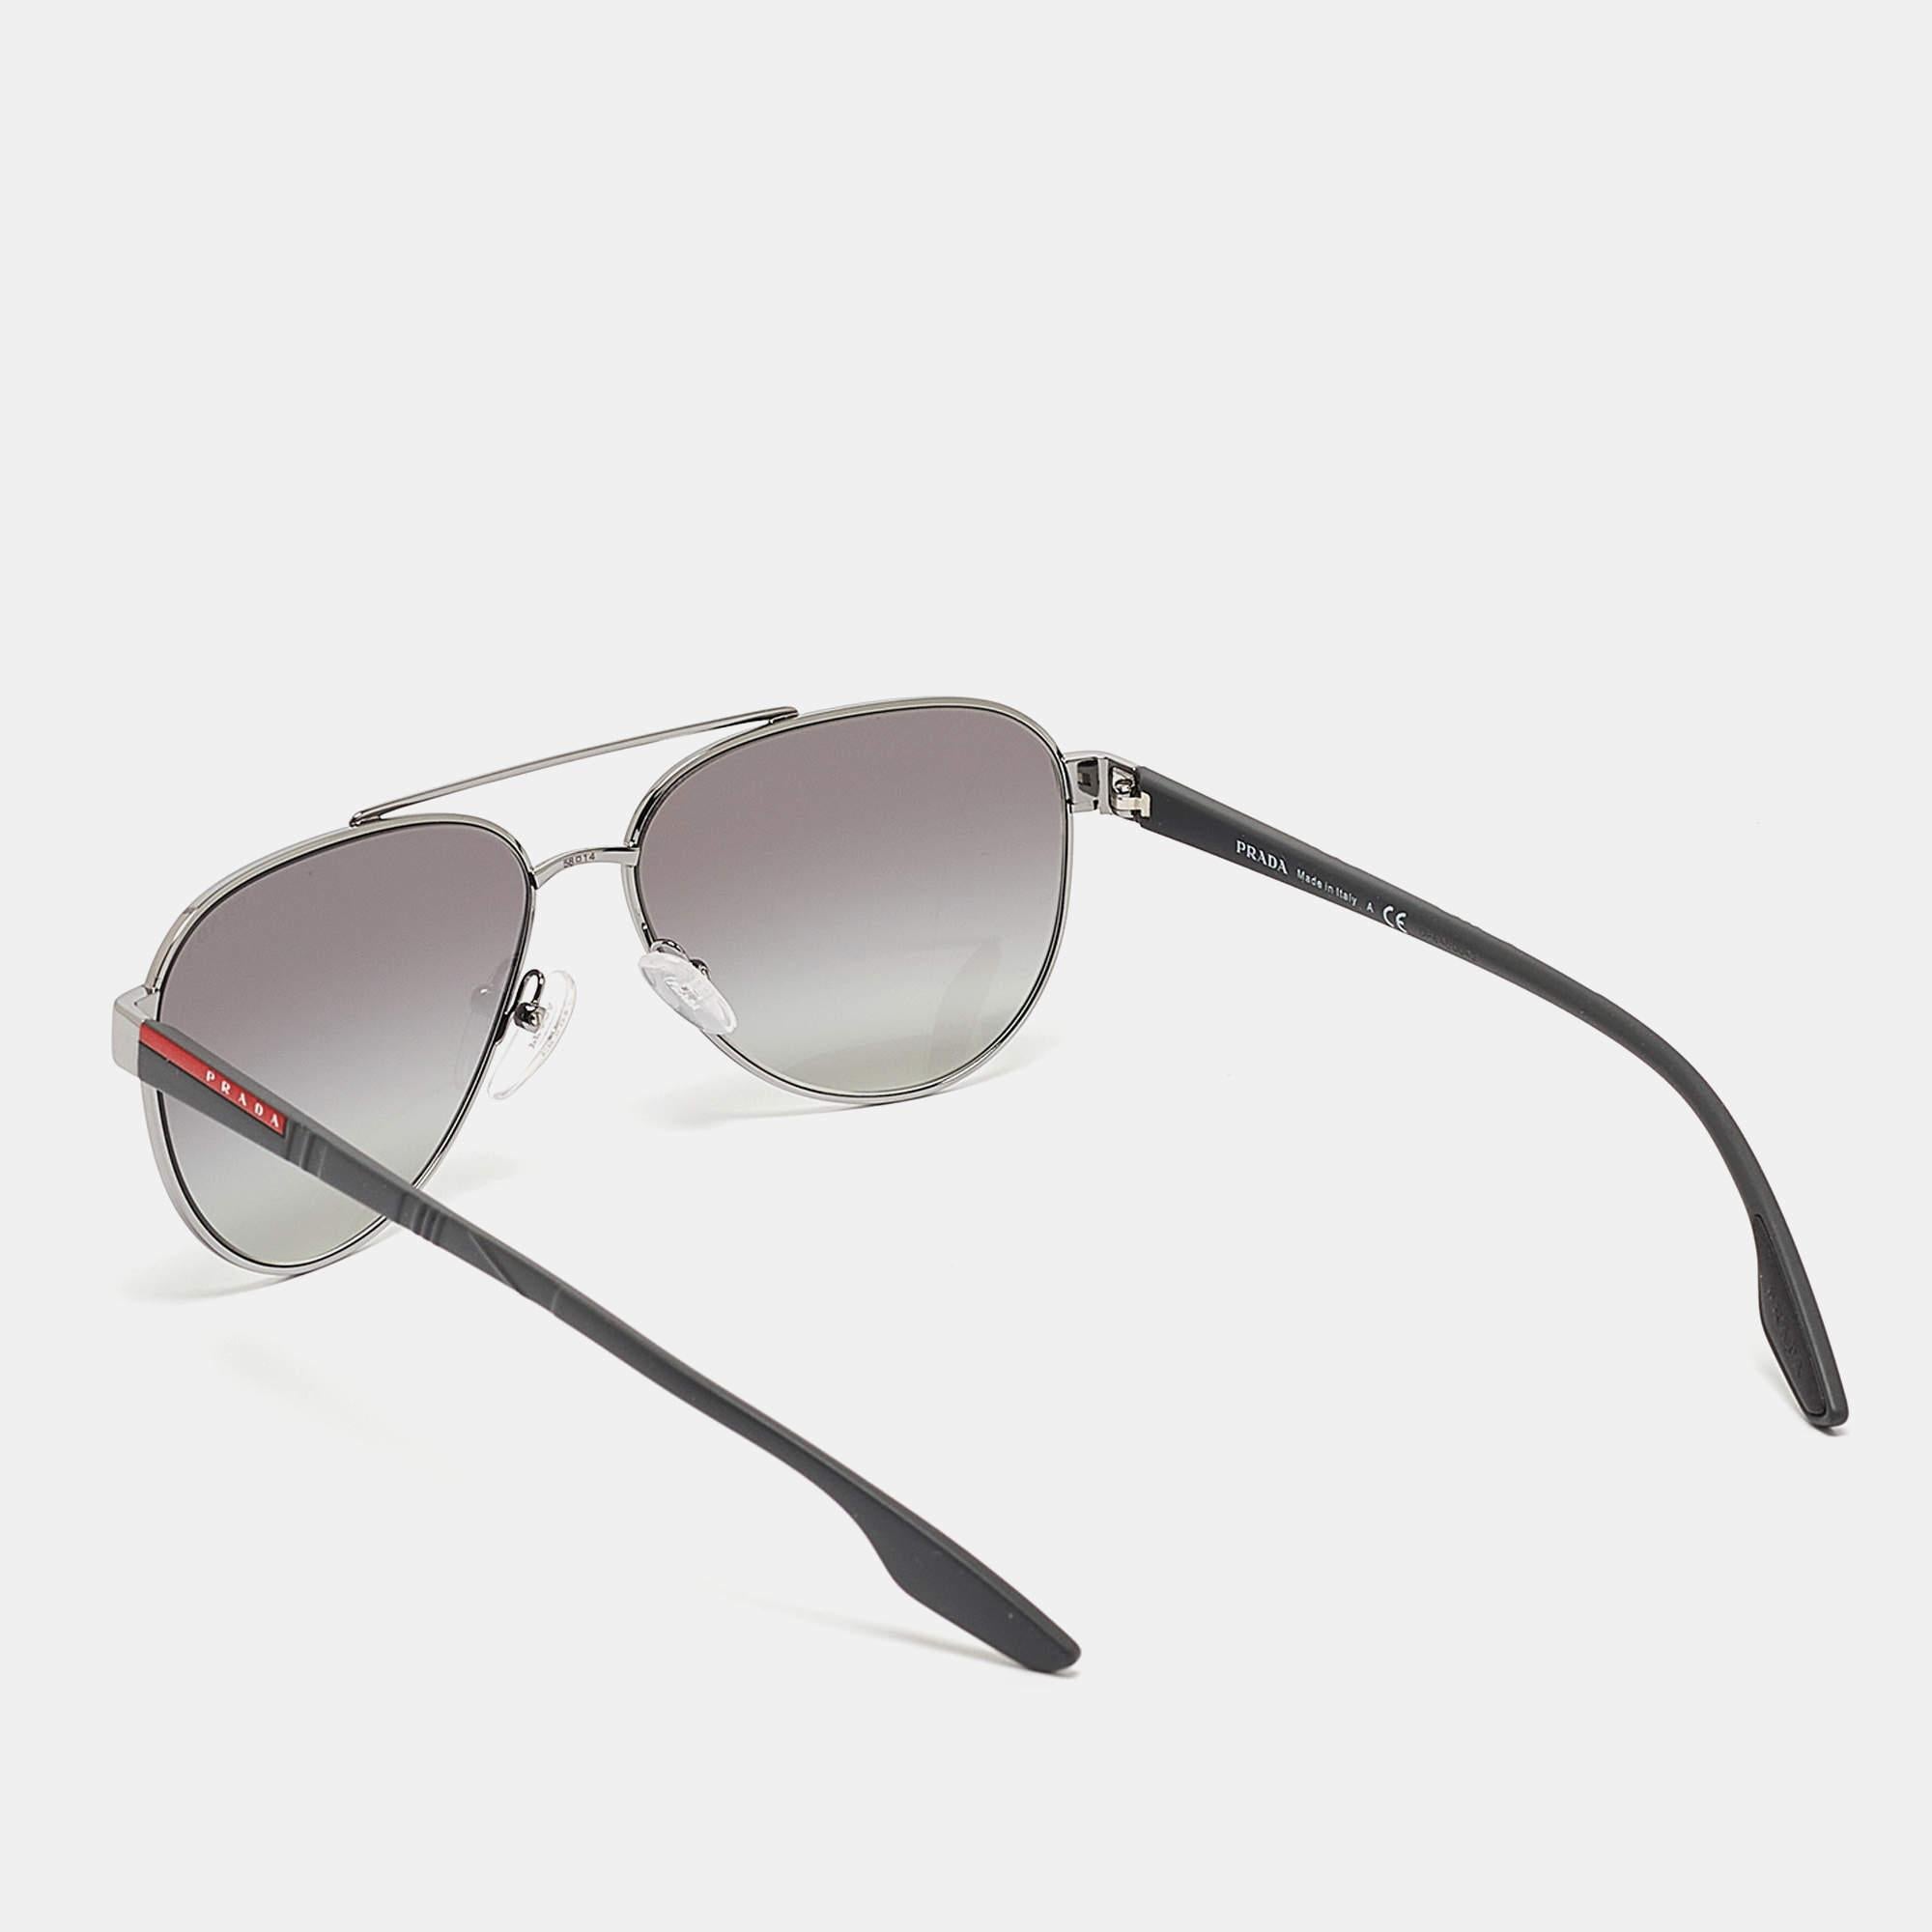 Embrace sunny days in full style with help from this pair of sunglasses by Prada Sport. Created with expertise, the luxe sunglasses feature a well-designed frame and high-grade lenses that are equipped to protect your eyes.

Includes: Original Case

